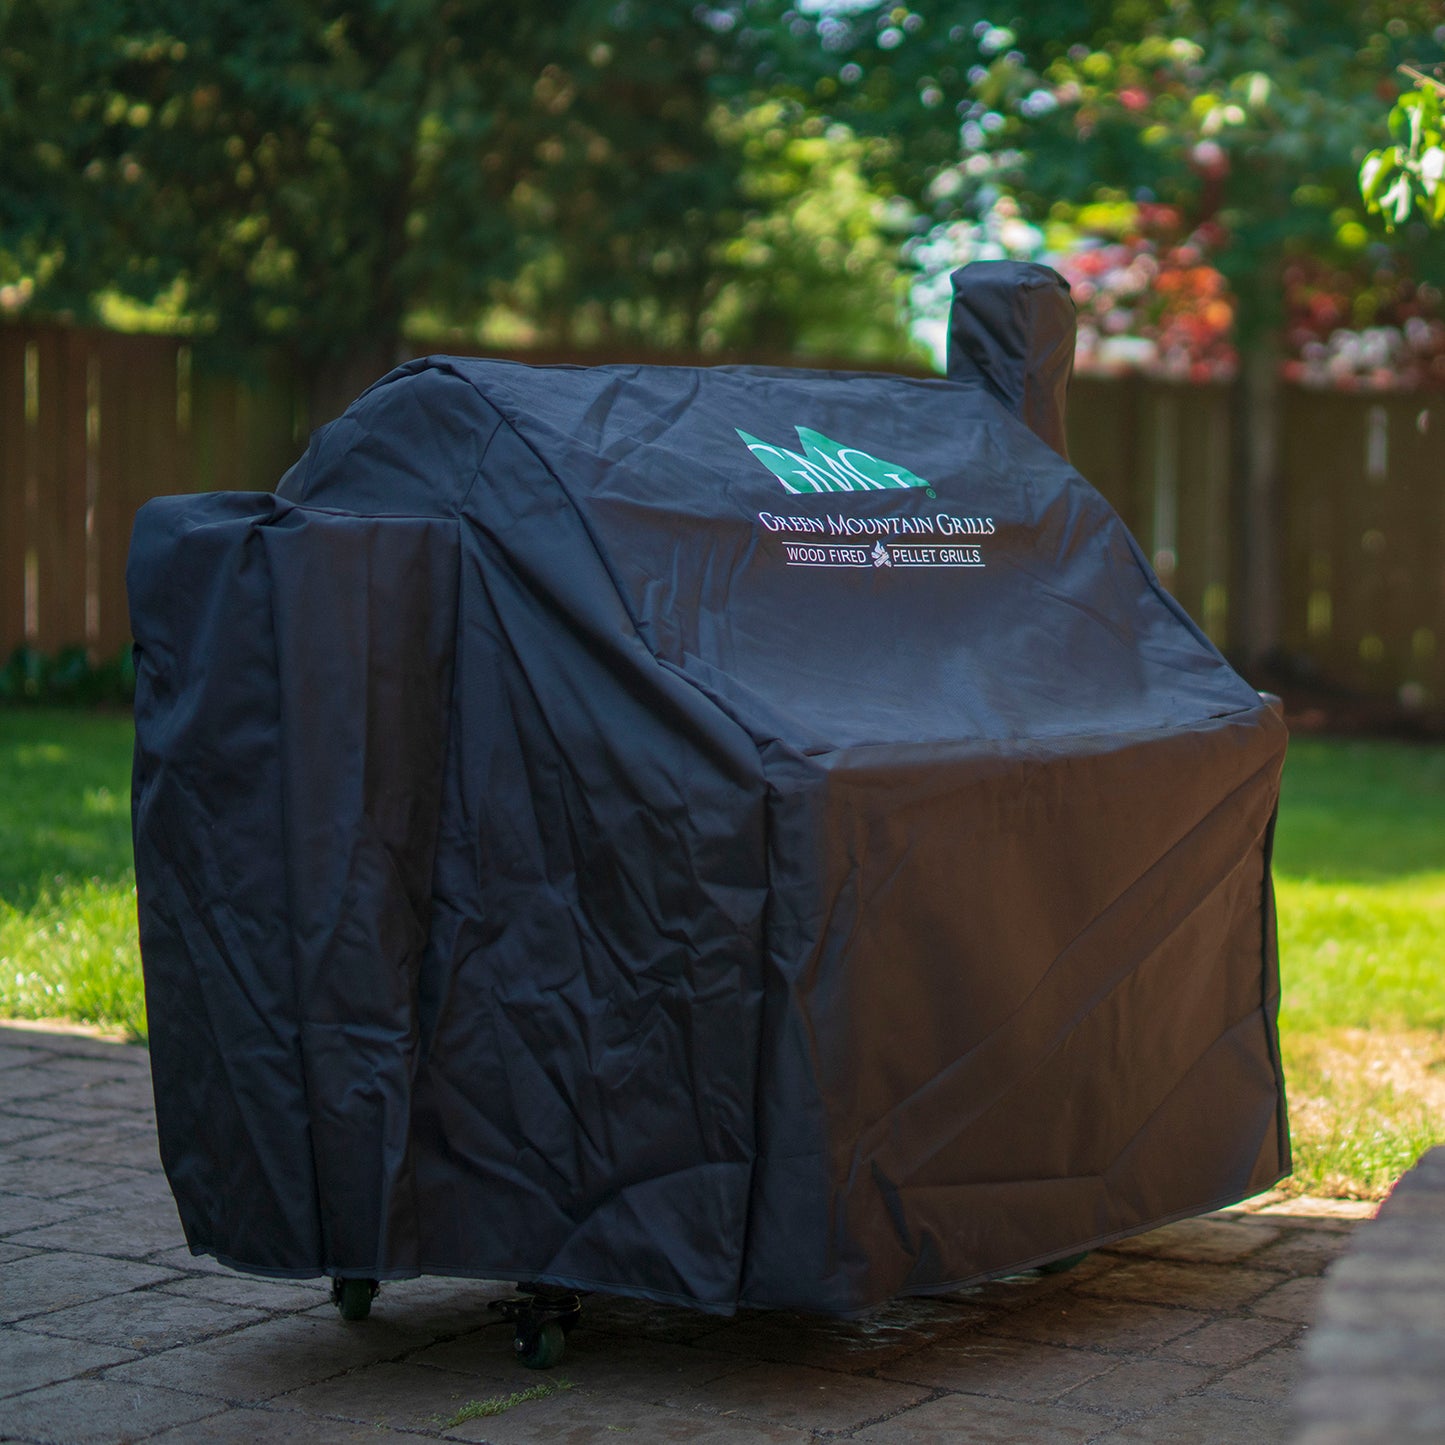 Green Mountain Grills Peak or Jim Bowie Grill Cover Green Mountain Grills Indigo Pool Patio BBQ